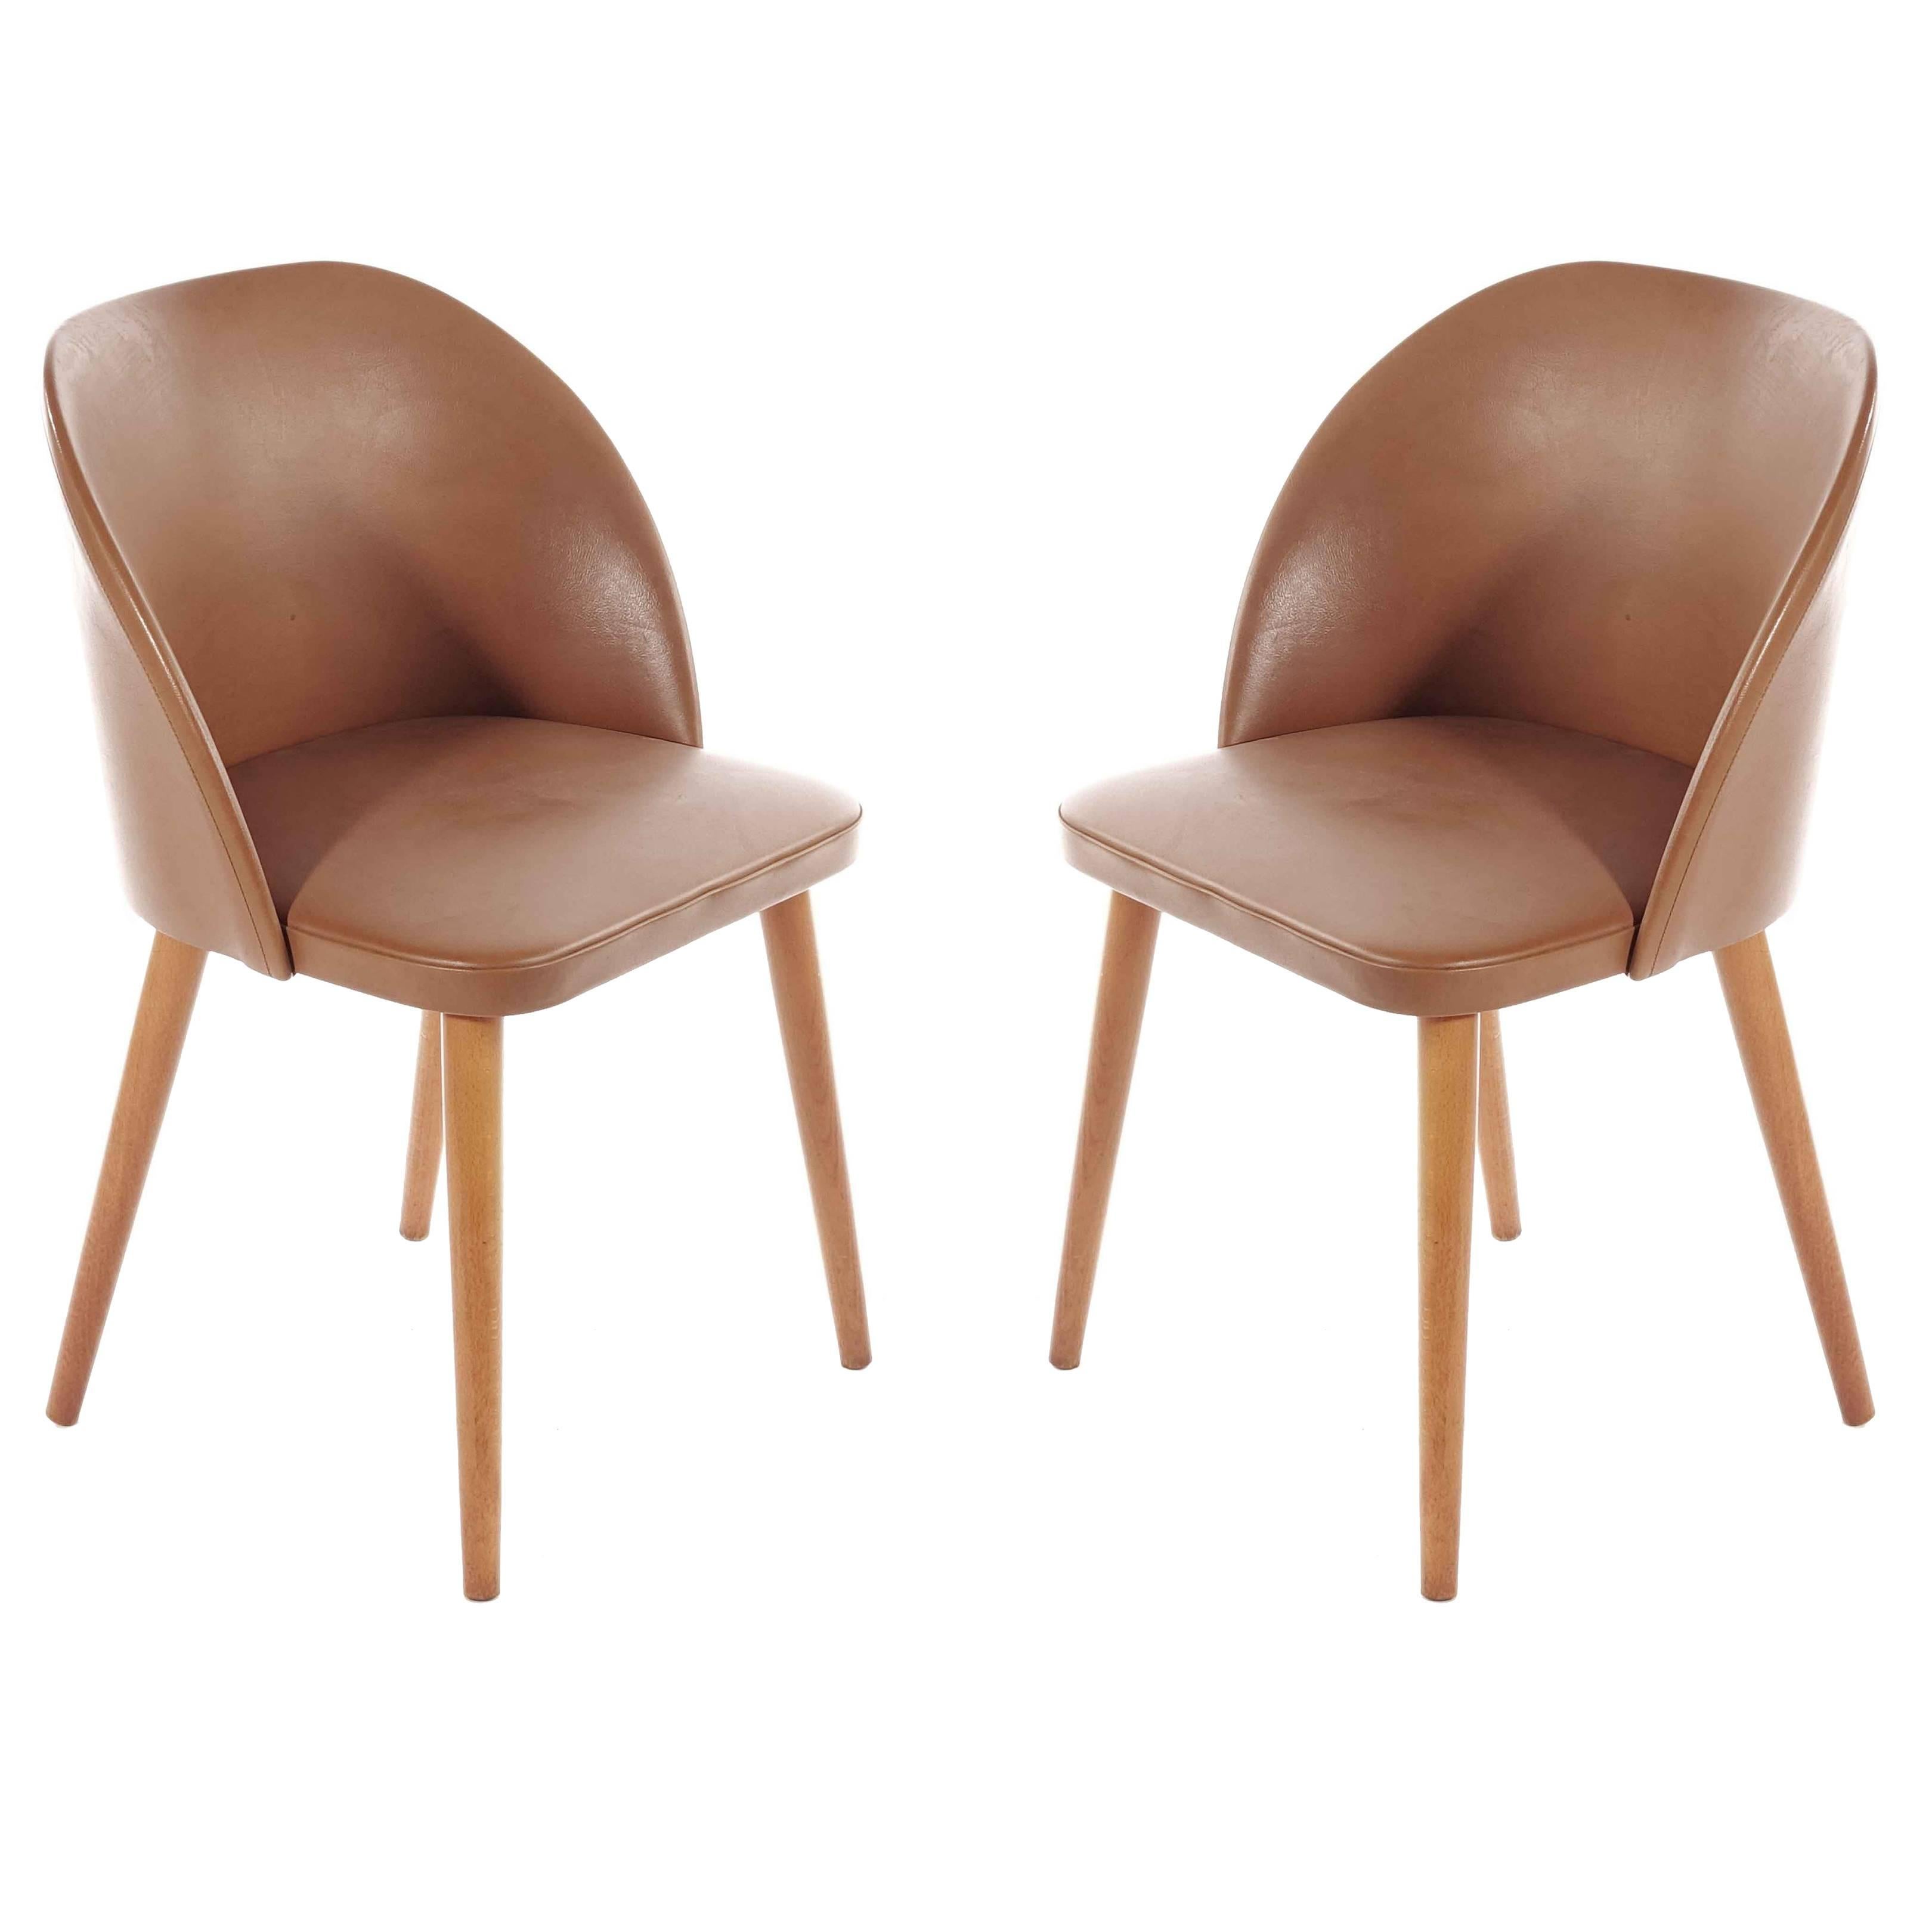 Swedish Retro Chairs in Birch from 1960s